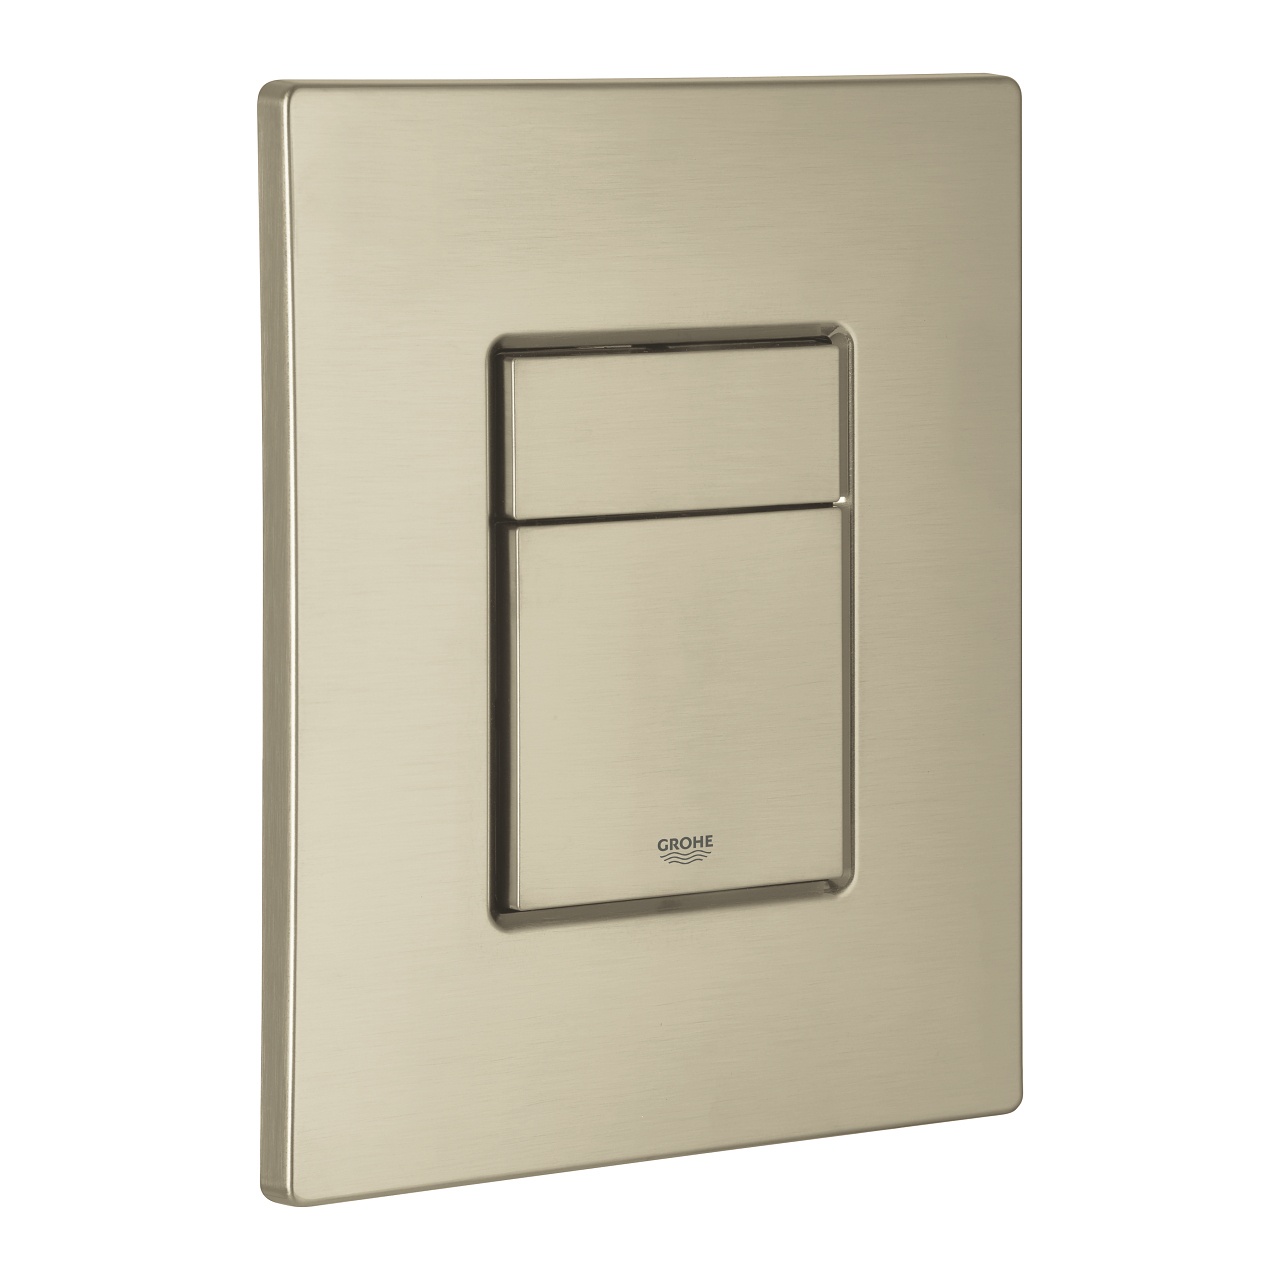 Skate Toilet Actuation Wall Plate in Brushed Nickel Infinity